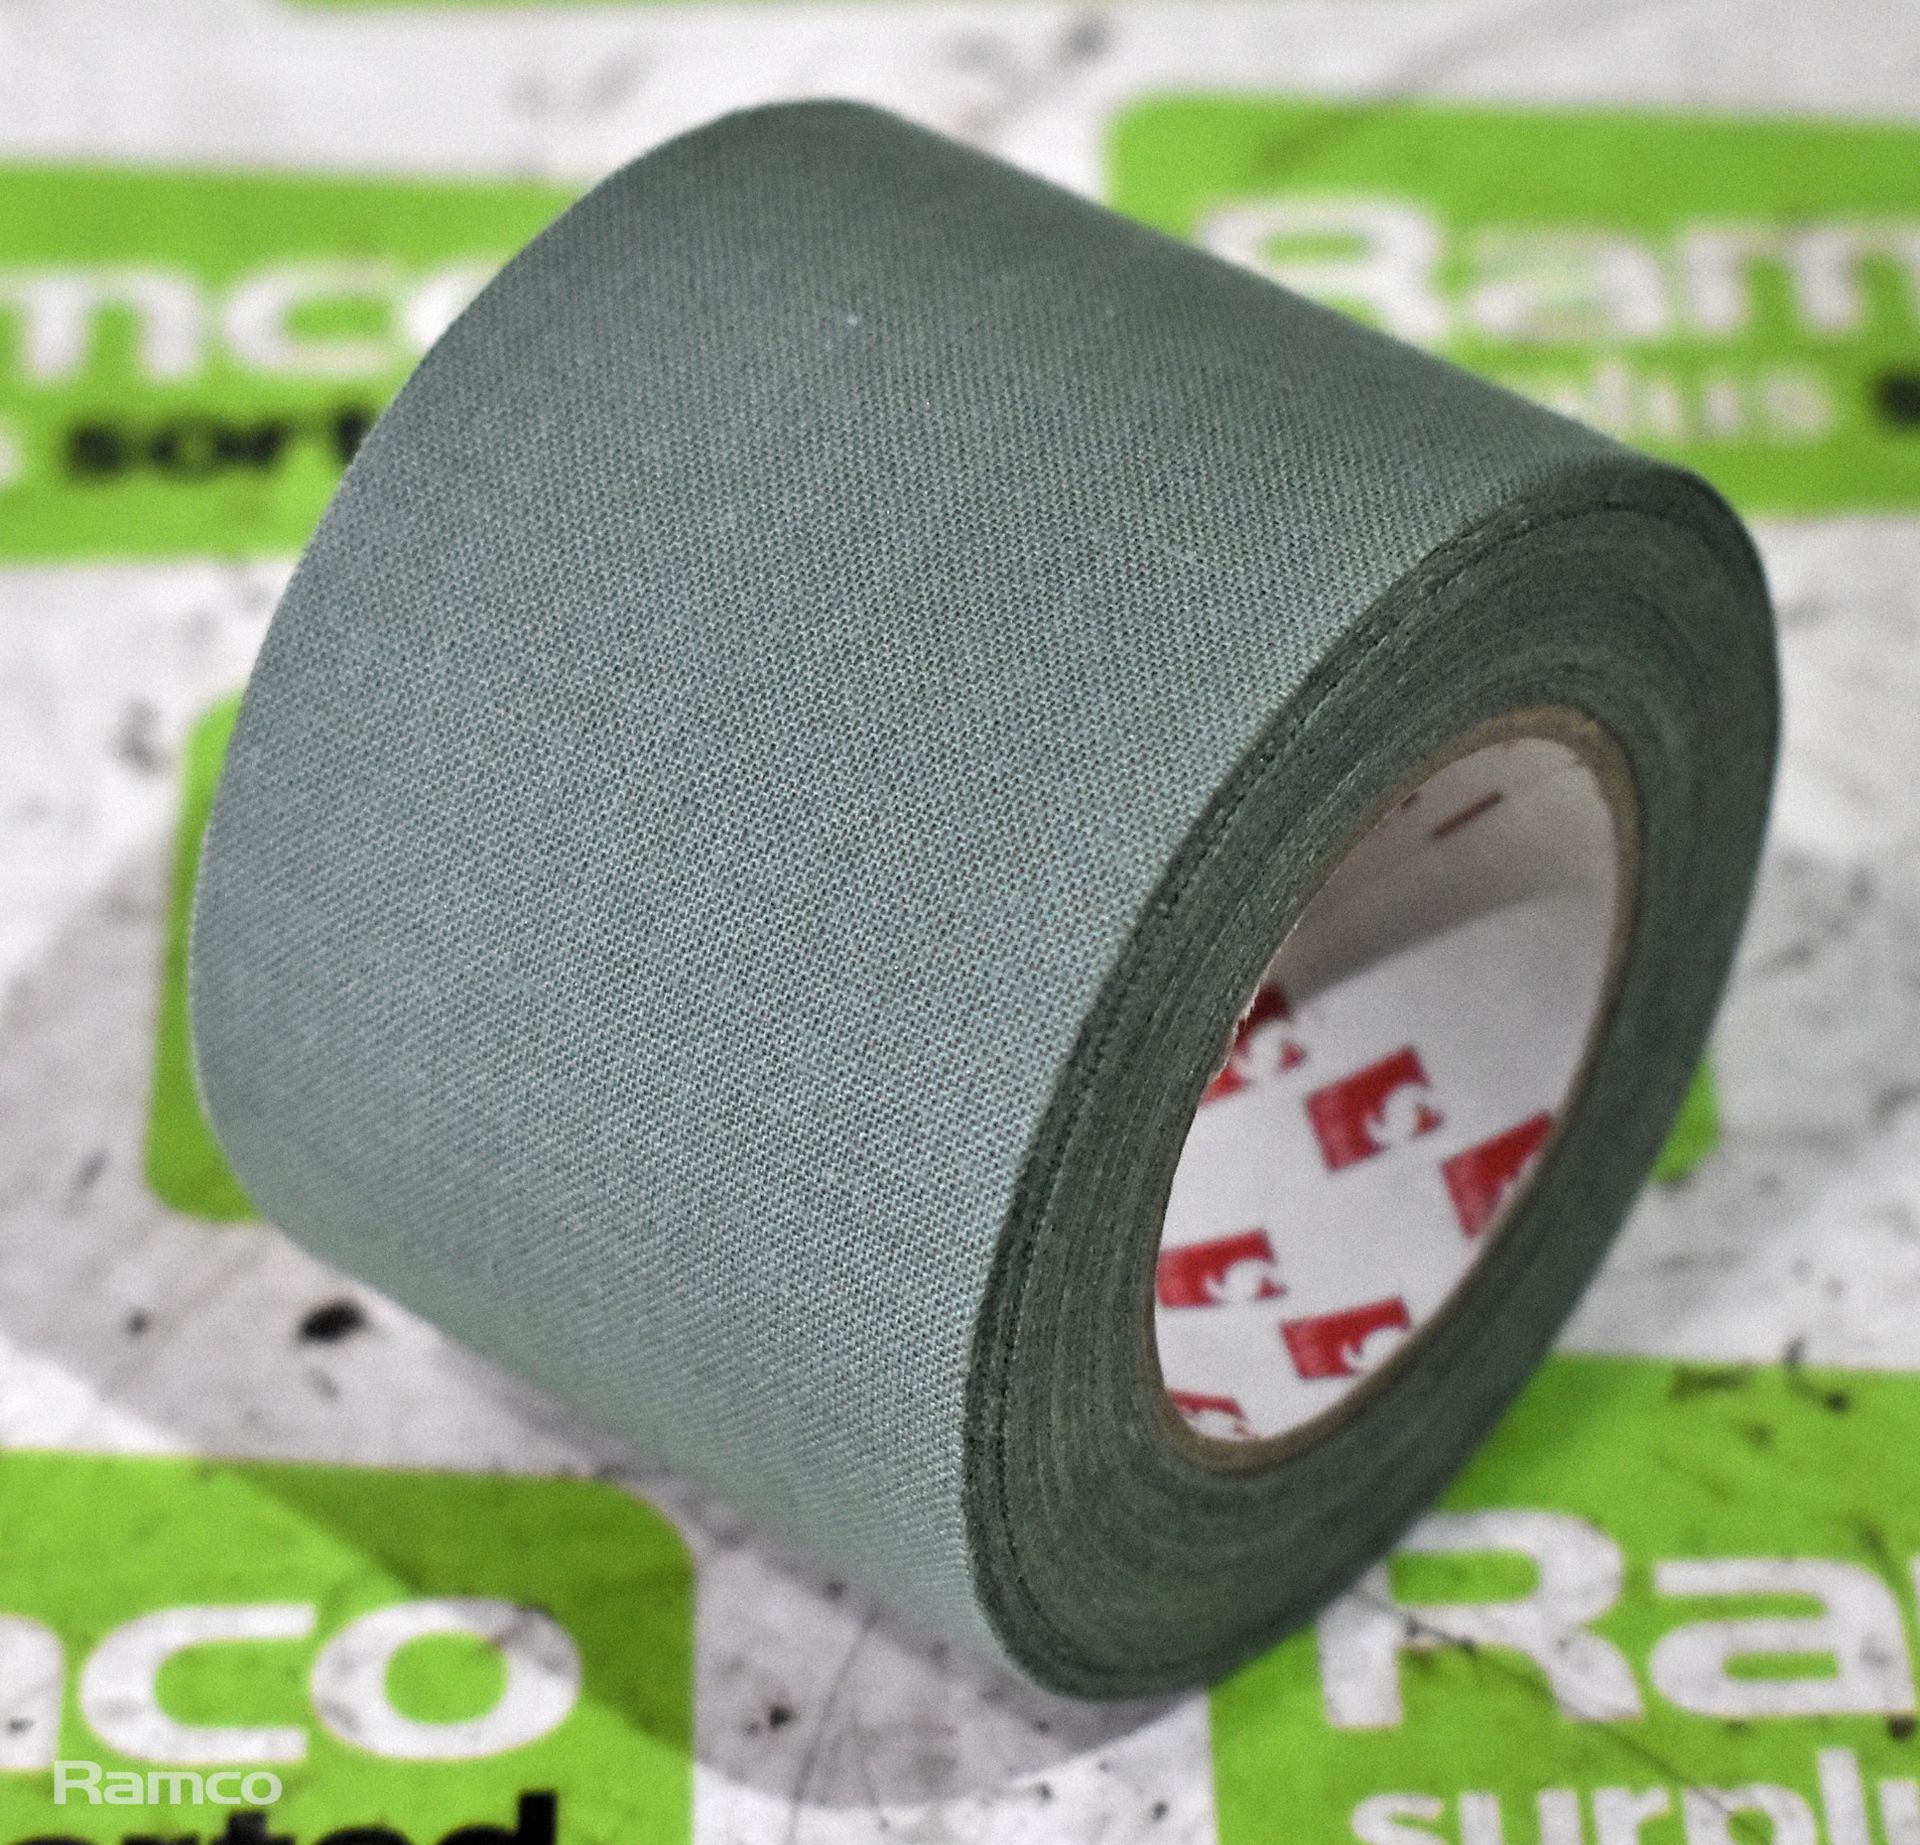 96x Rolls of Scapa tape - Olive green - 50mm x 10m - Image 2 of 4